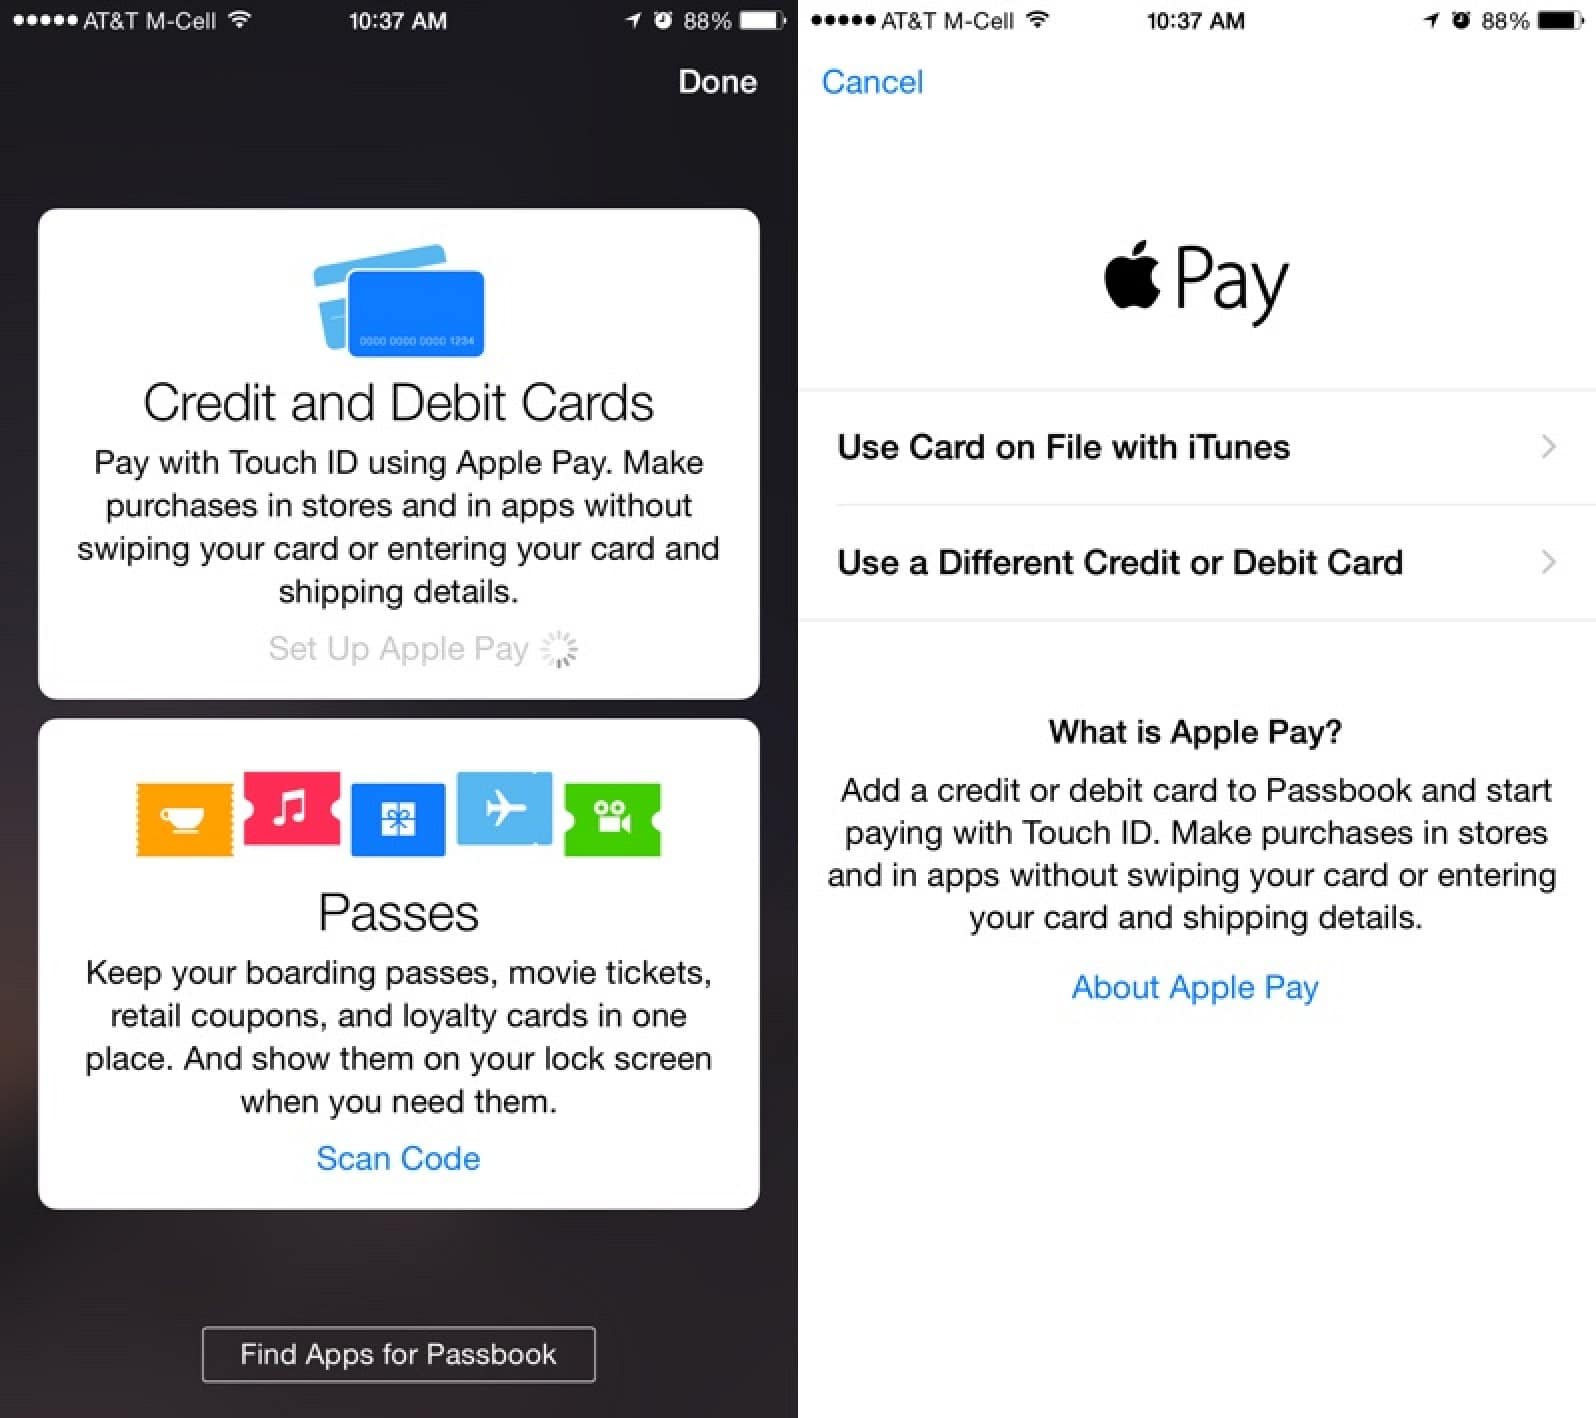 How to Set Up Apple Pay and Add Credit Cards